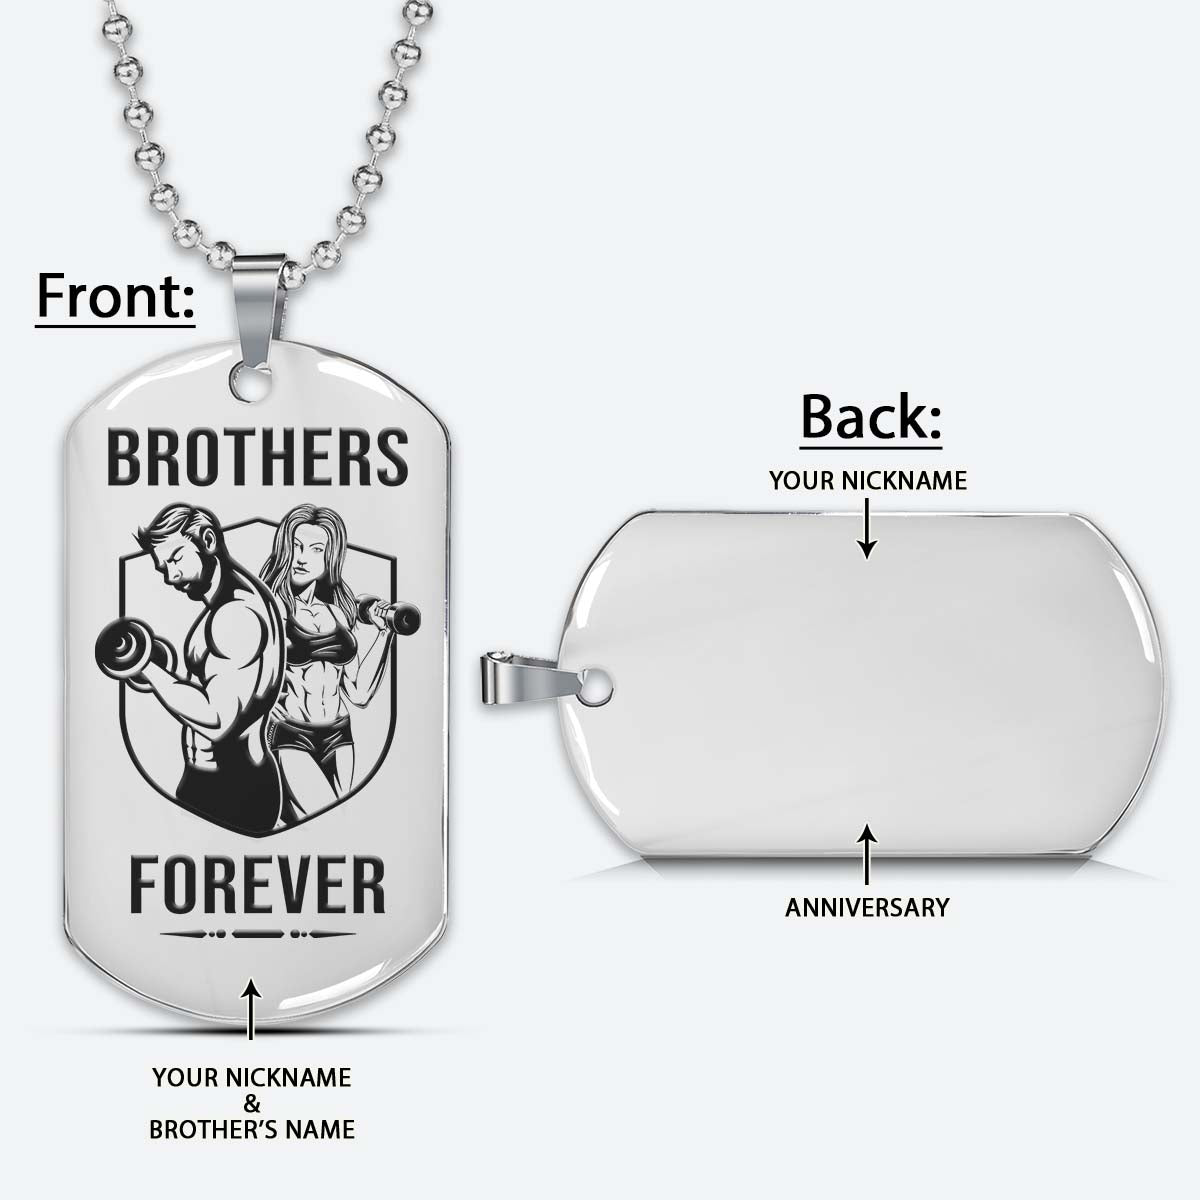 GYMD003 - Brothers Forever - Gym - Fitness Center - Workout - Gym Dog Tag - Gym Necklace - Silver Engrave Dog Tag